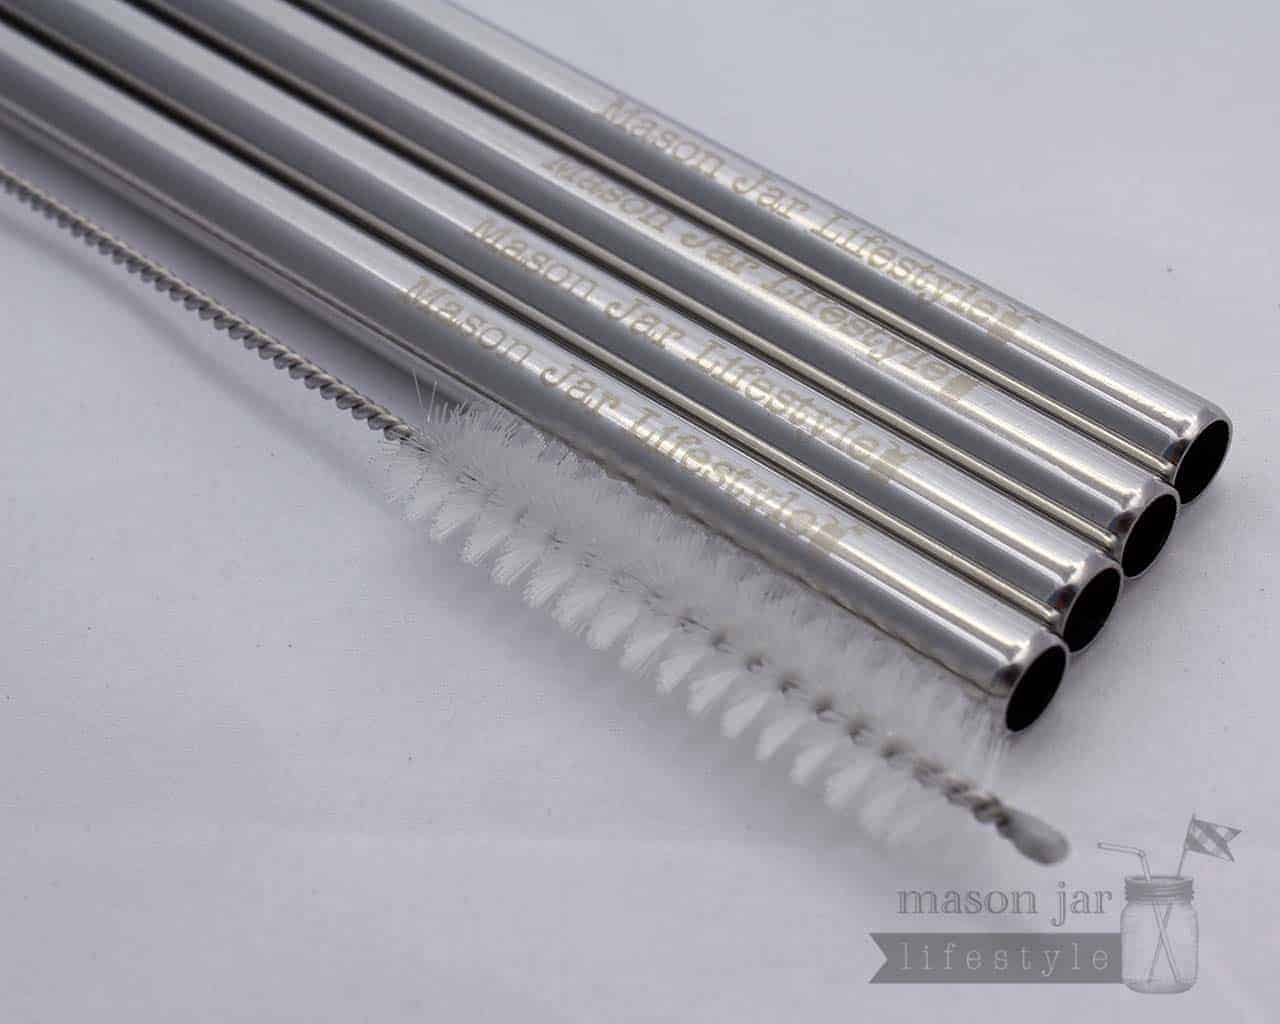 Four stainless steel straws with safer rounded ends and cleaning brush